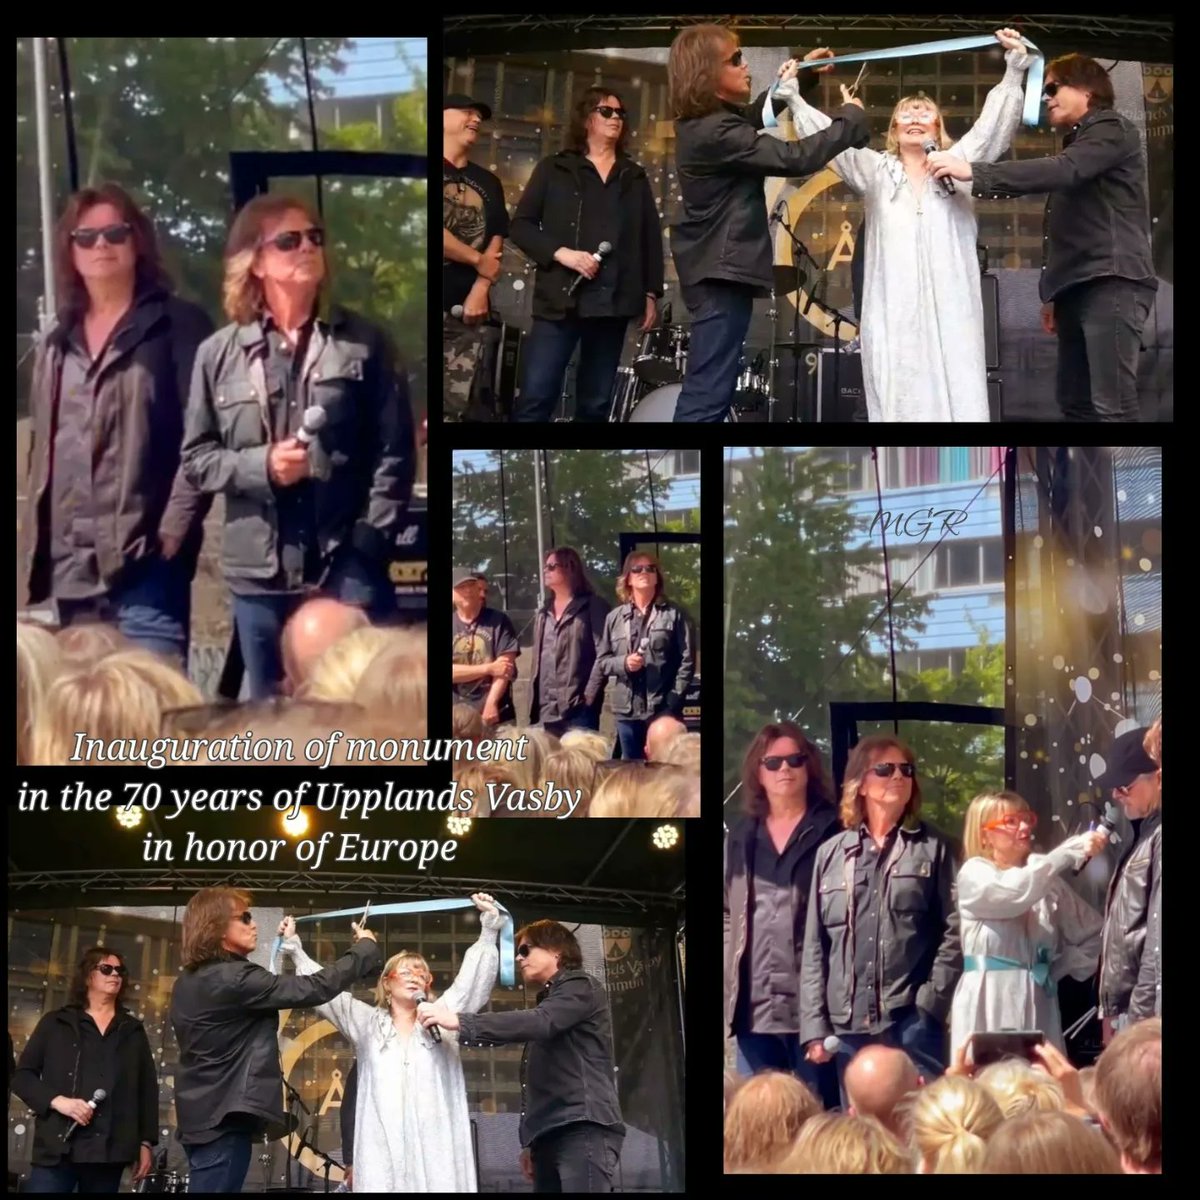 Unveiling of the monument in honor of the band Europe at Upplands Vasby 2022!! #europetheband #hardrock #rock #heavymetal #rocklegends #europetheband #europetour2022 #rocklegends #europeband #europebandfan #thefinalcountdown